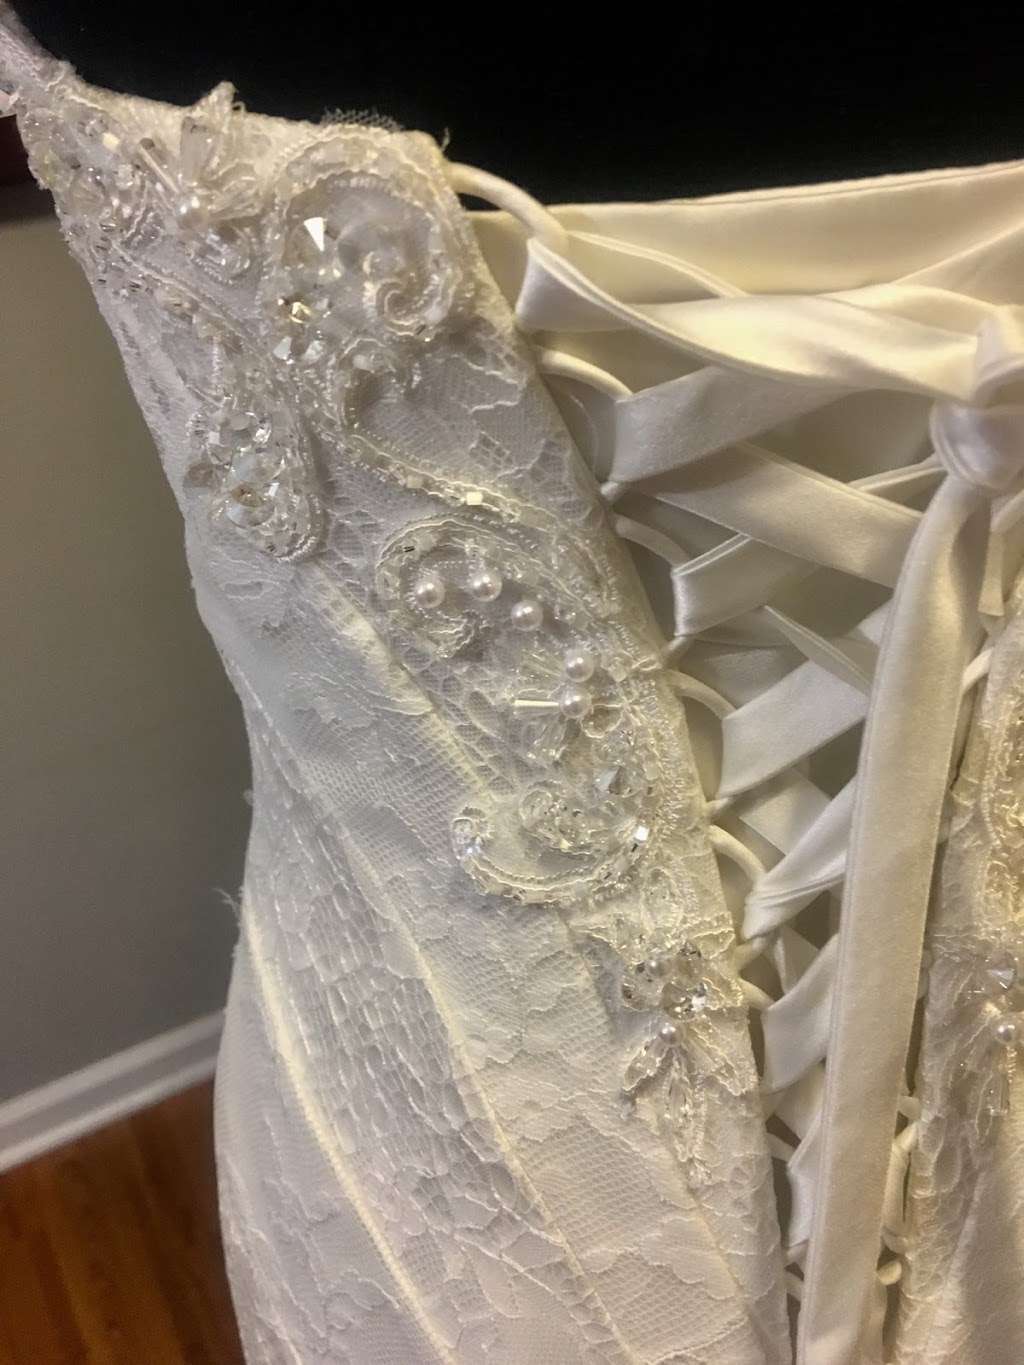 Two Sisters Bridal Gowns | 2542 Red Oak Dr, Dyer, IN 46311, USA | Phone: (219) 290-7044